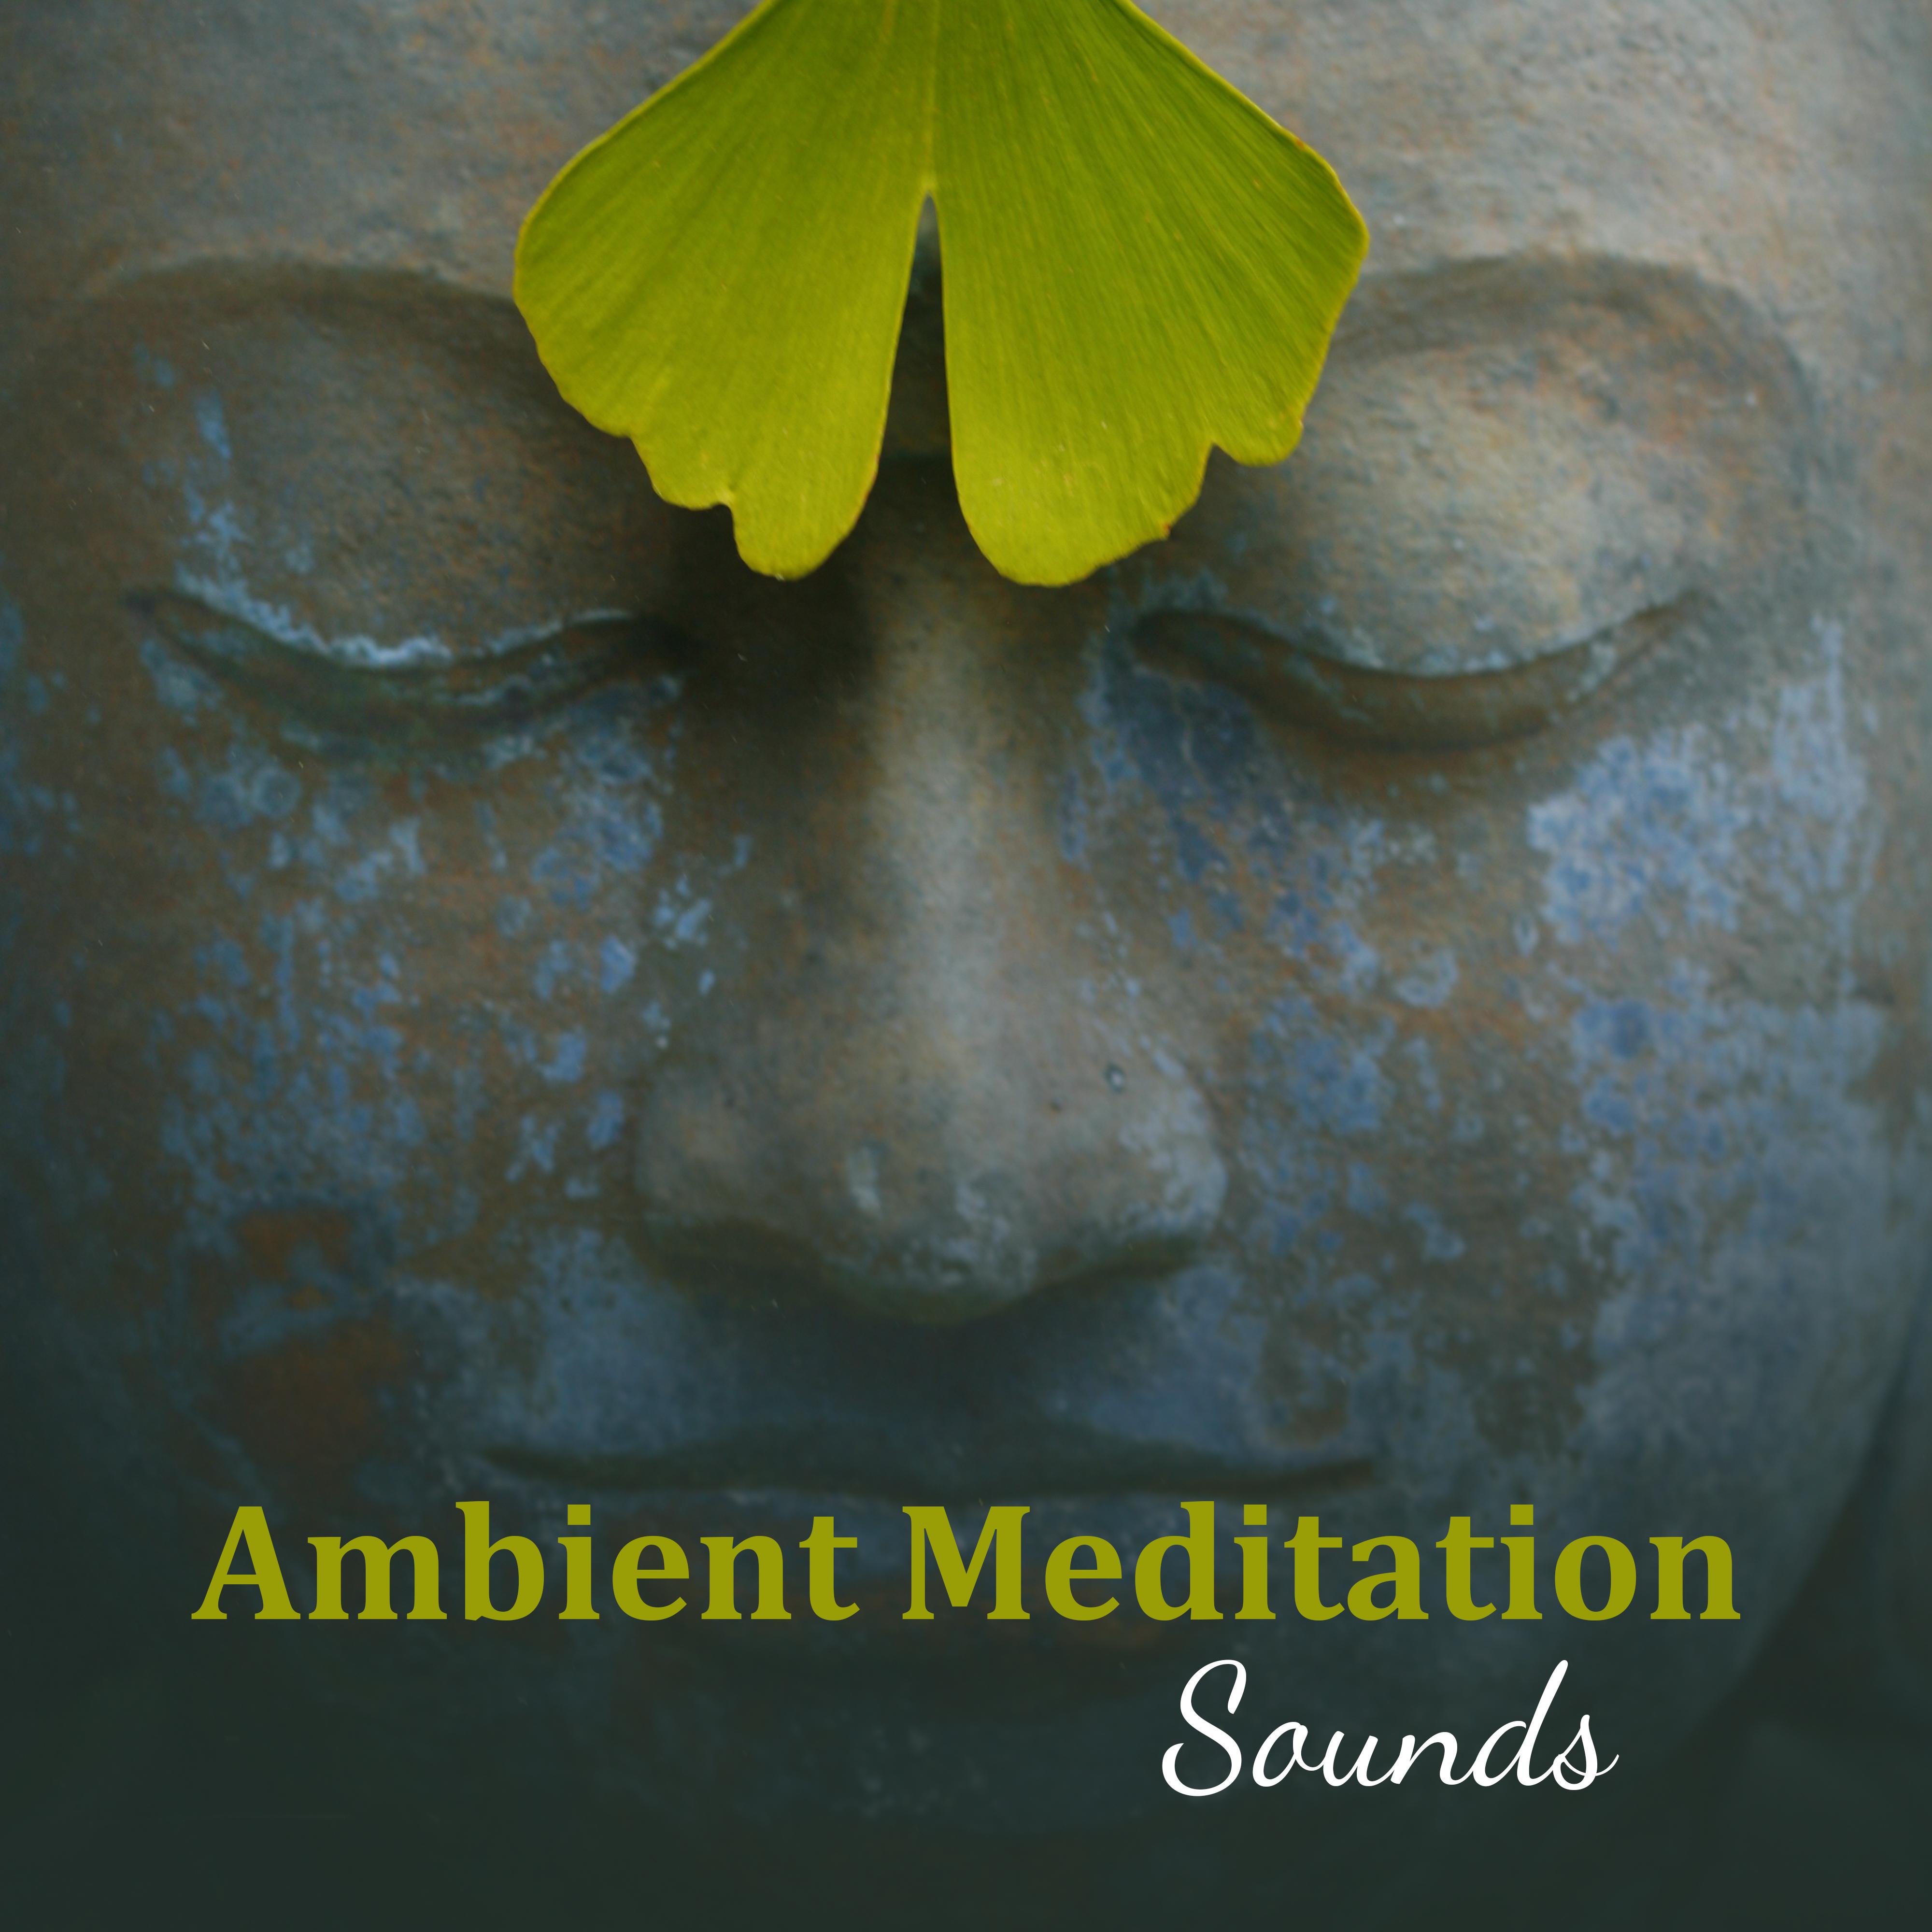 Ambient Meditation Sounds – Time to Meditate, Sounds for Spiritual Calmness, Buddha Lounge, Peaceful Mind & Body